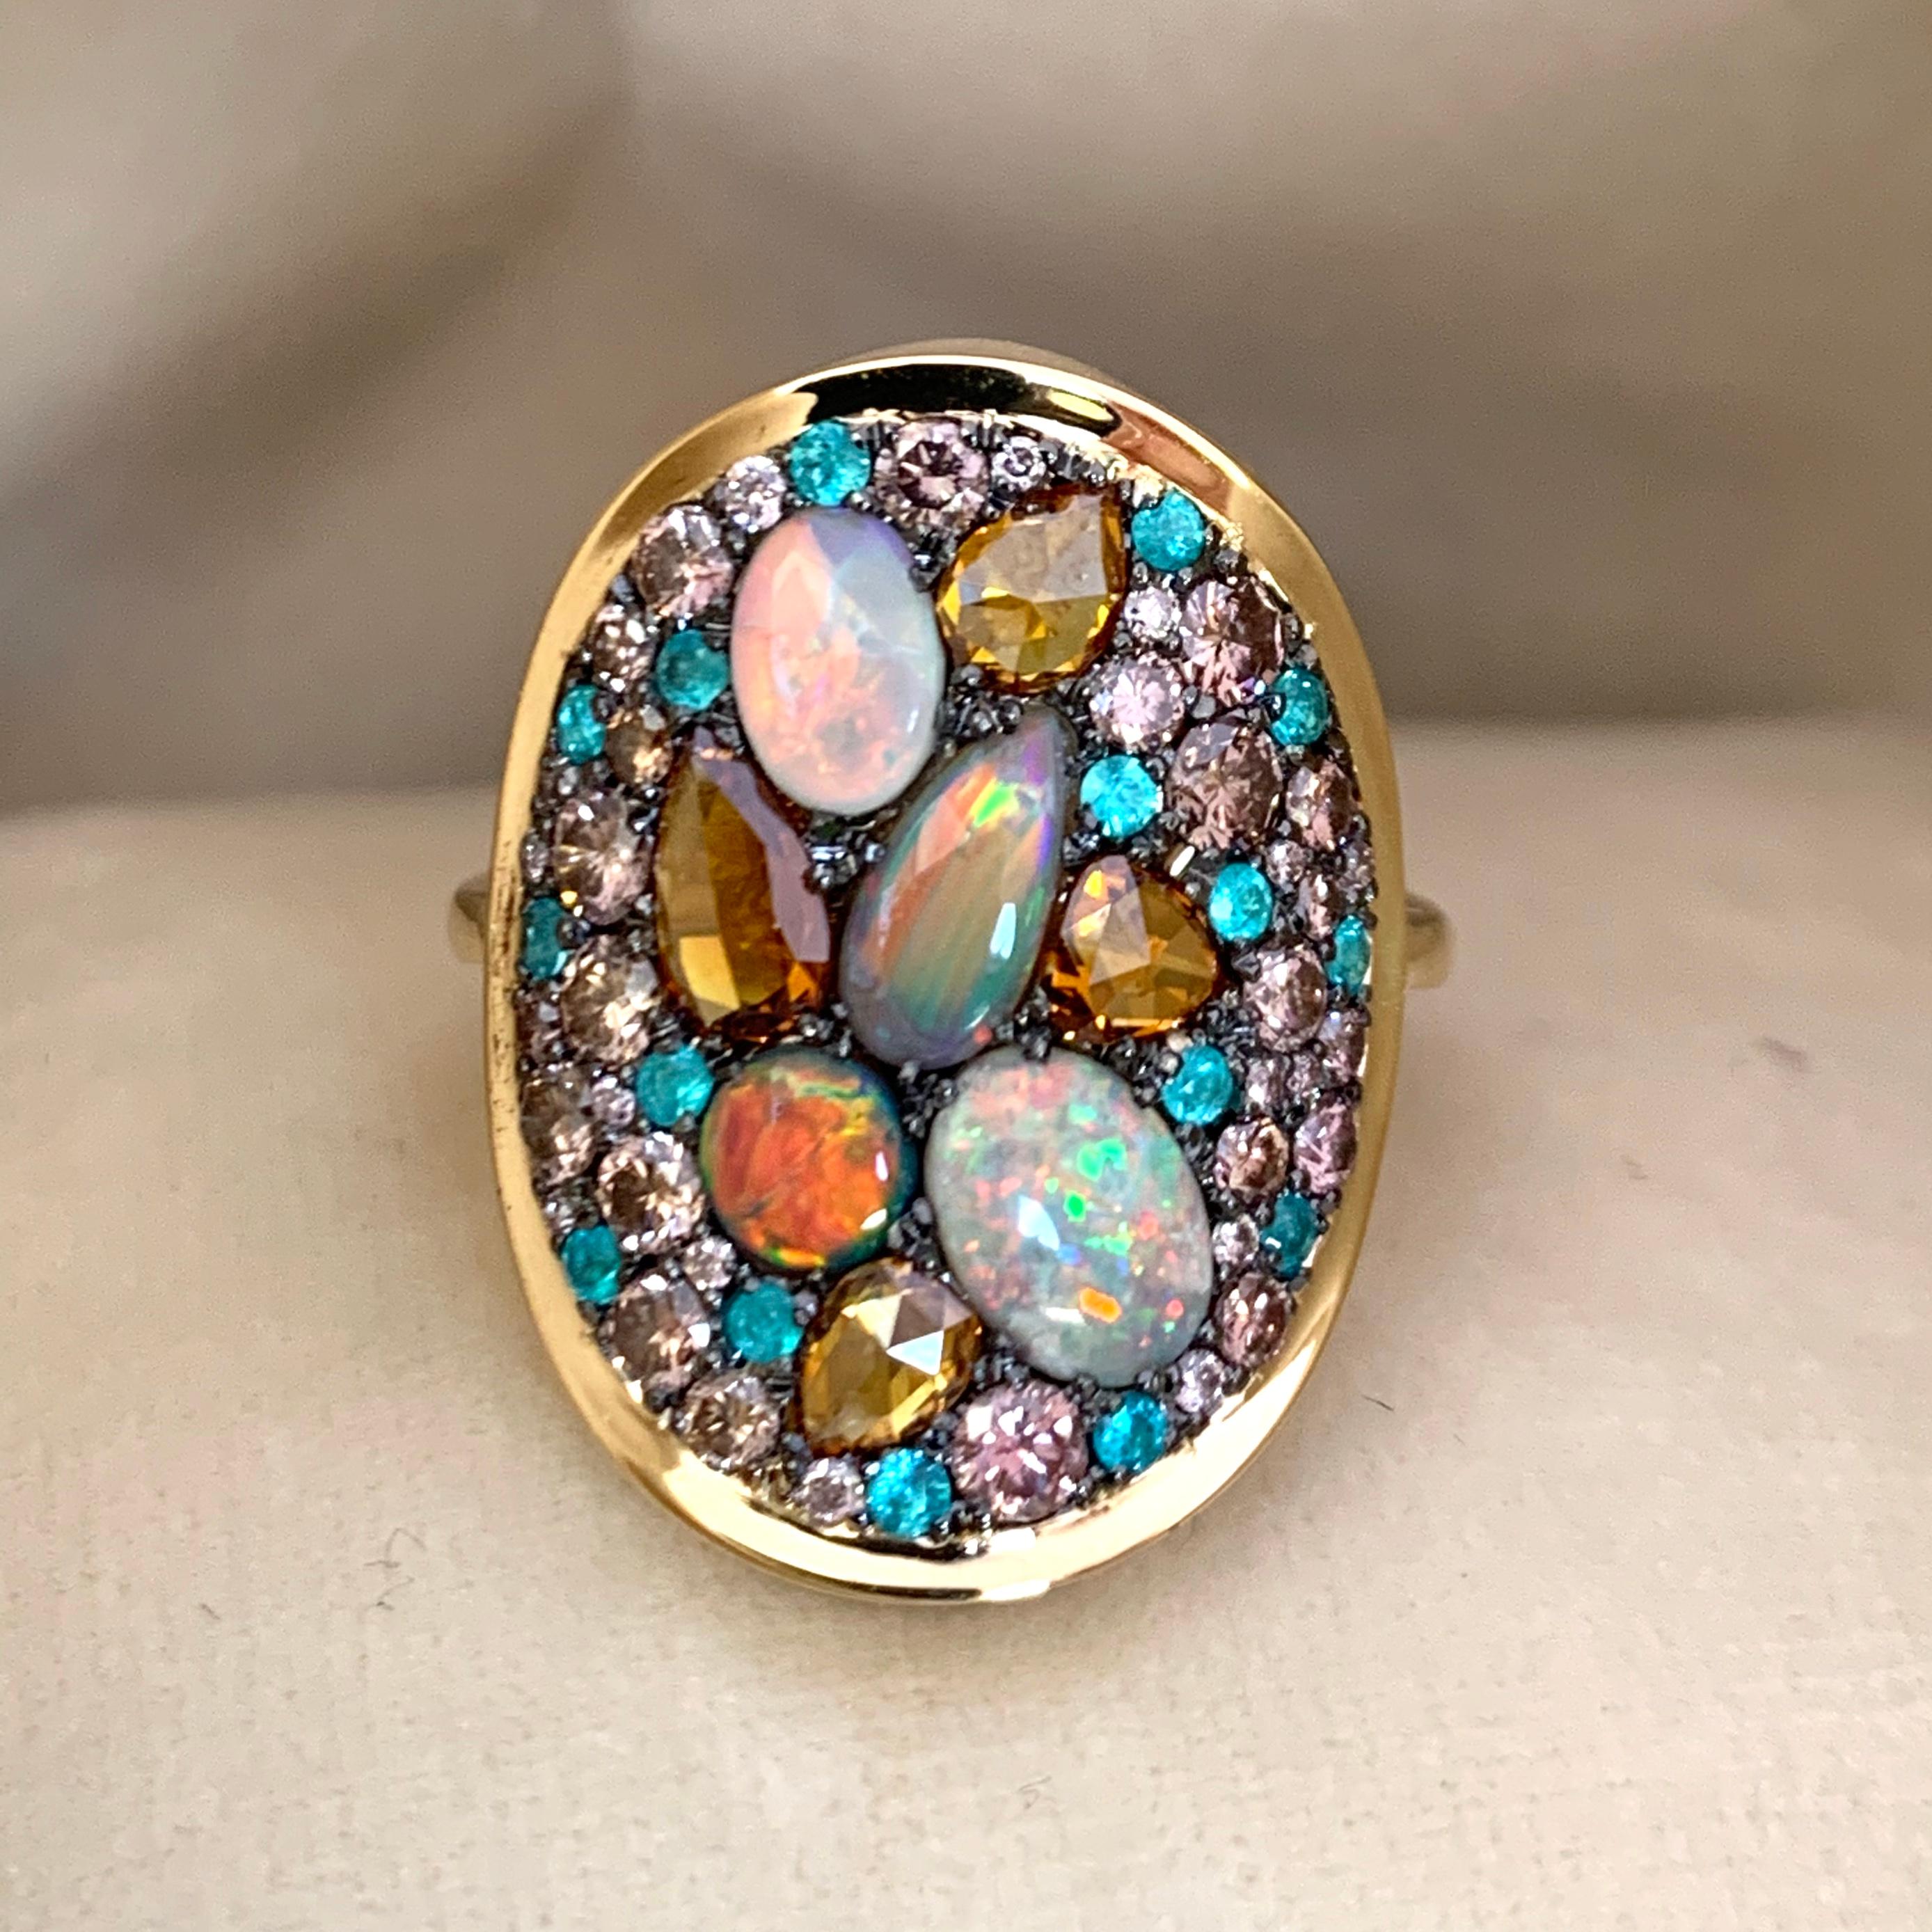 One of a kind 'Starstruck' ring handmade in Belgium by jewellery artist Joke Quick, in 18K yellow gold 12.2 g & blackened sterling silver 1.7 gram (The stones are set on silver to create a black background for the stones.)
2 Black Opals and 2 Dark